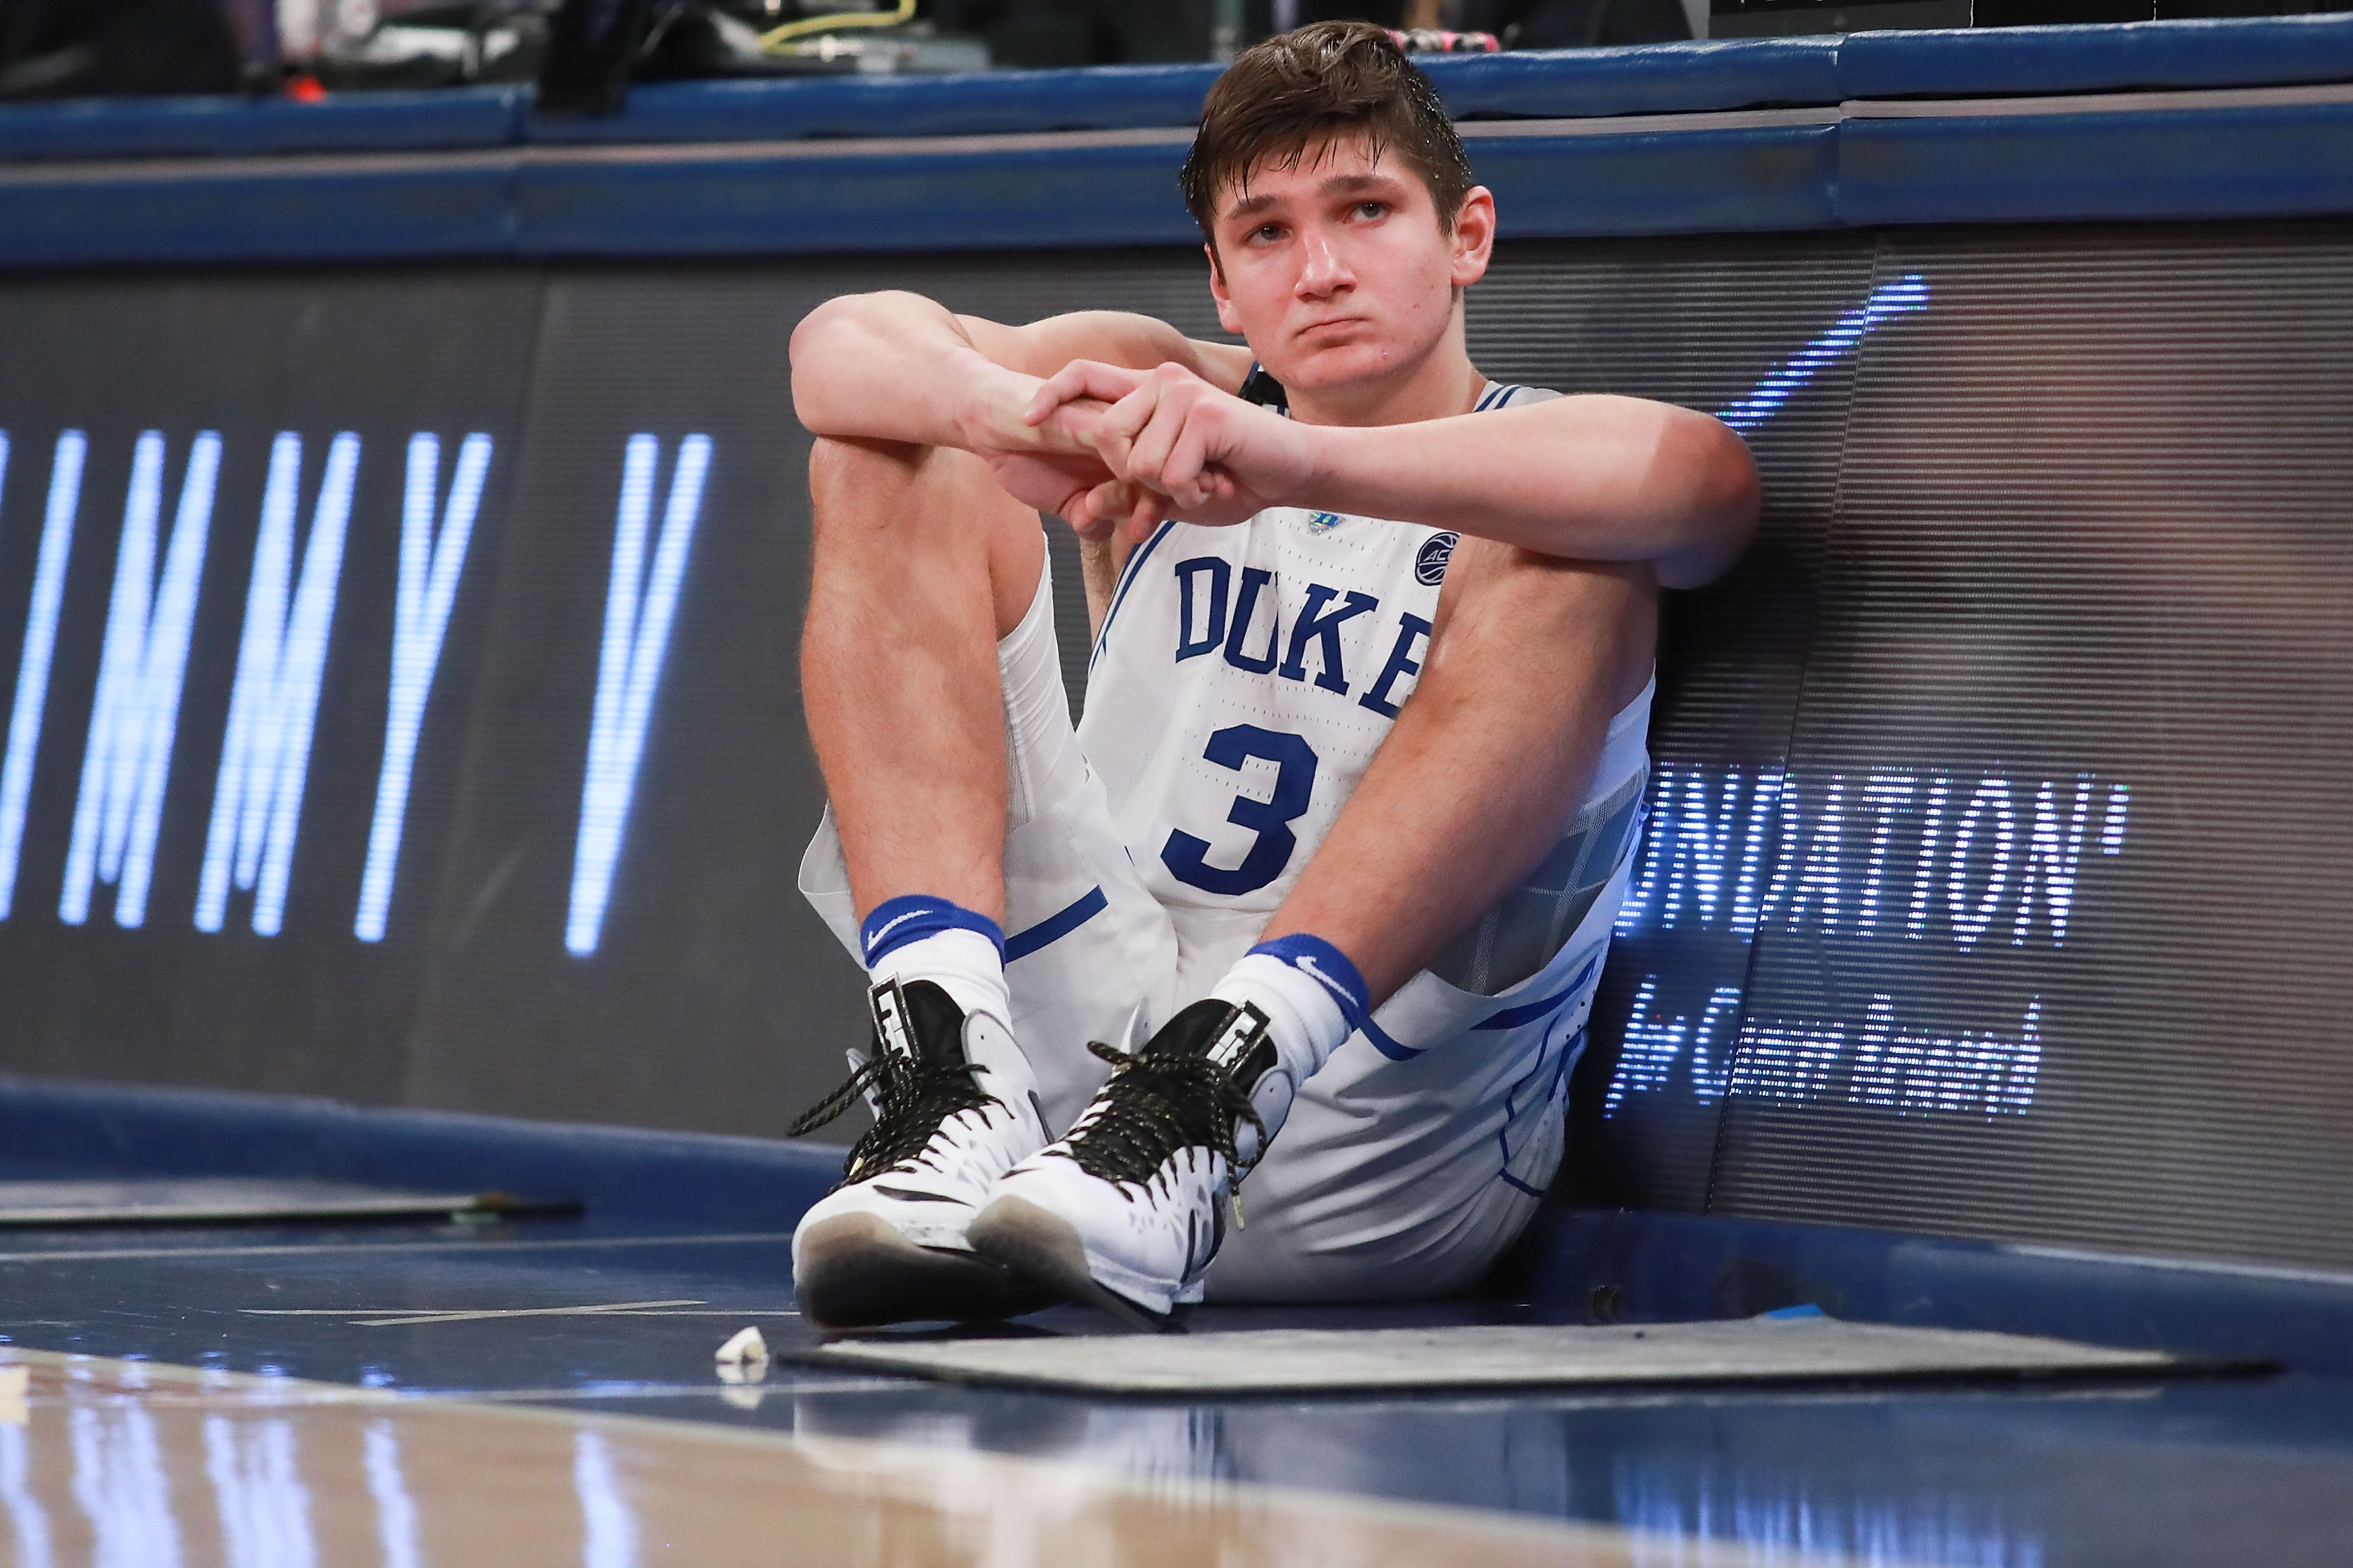 NEW YORK, NY - DECEMBER 06: Grayson Allen #3 of the Duke Blue Devils looks on against the Florida Gators in the second half during the Jimmy V Classic at Madison Square Garden on December 6, 2016 in New York City. (Photo by Michael Reaves/Getty Images)